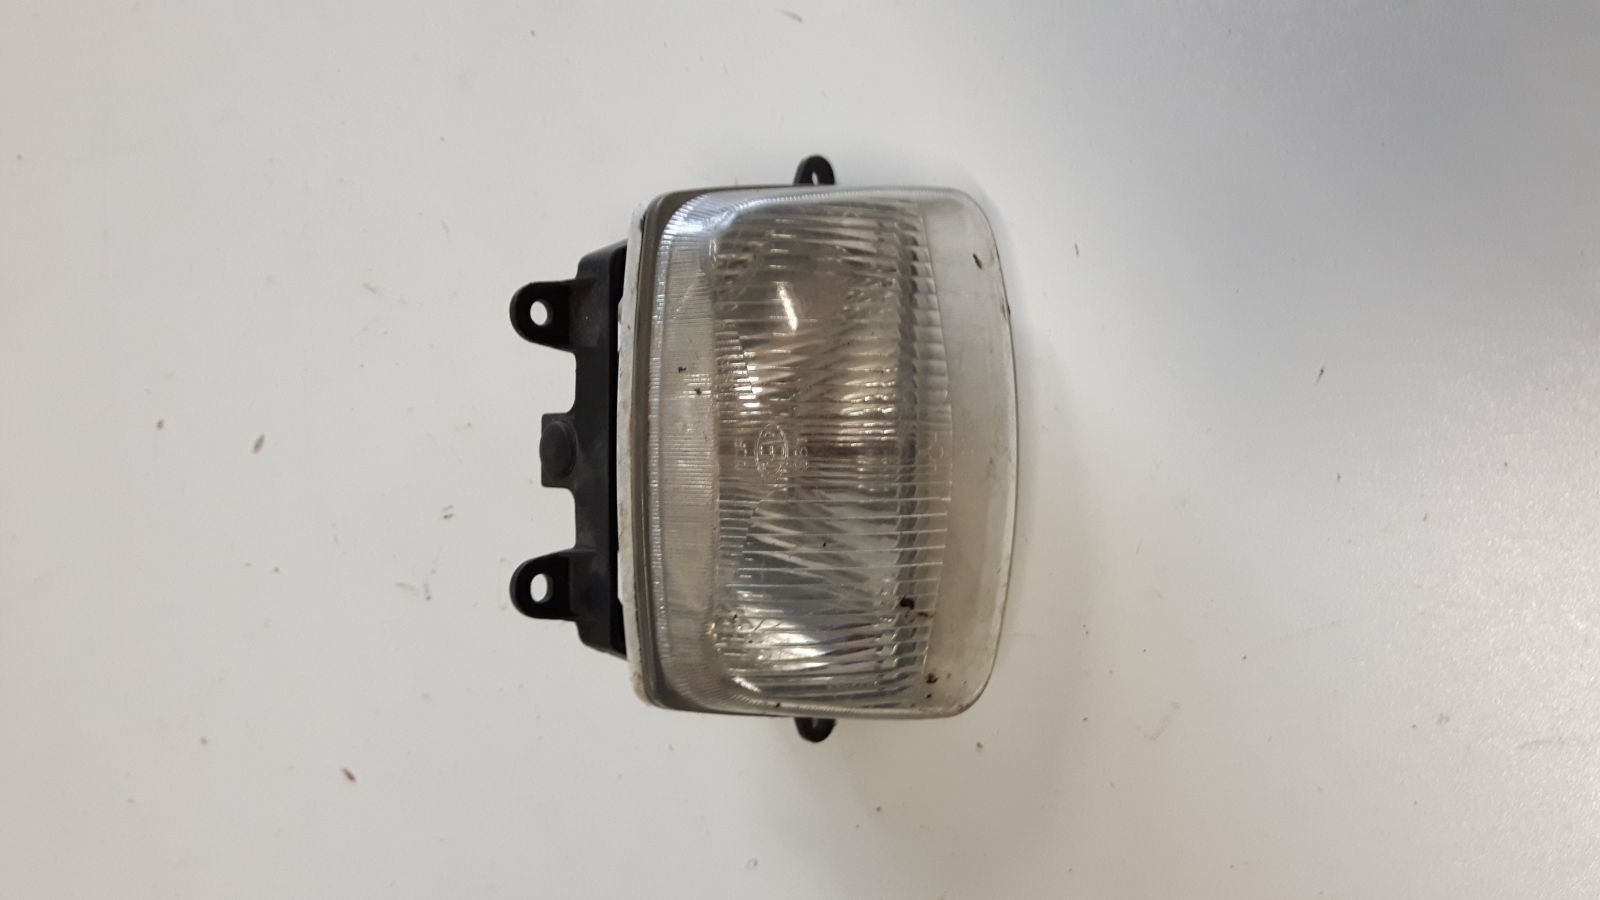 Headlight for moped/scooter